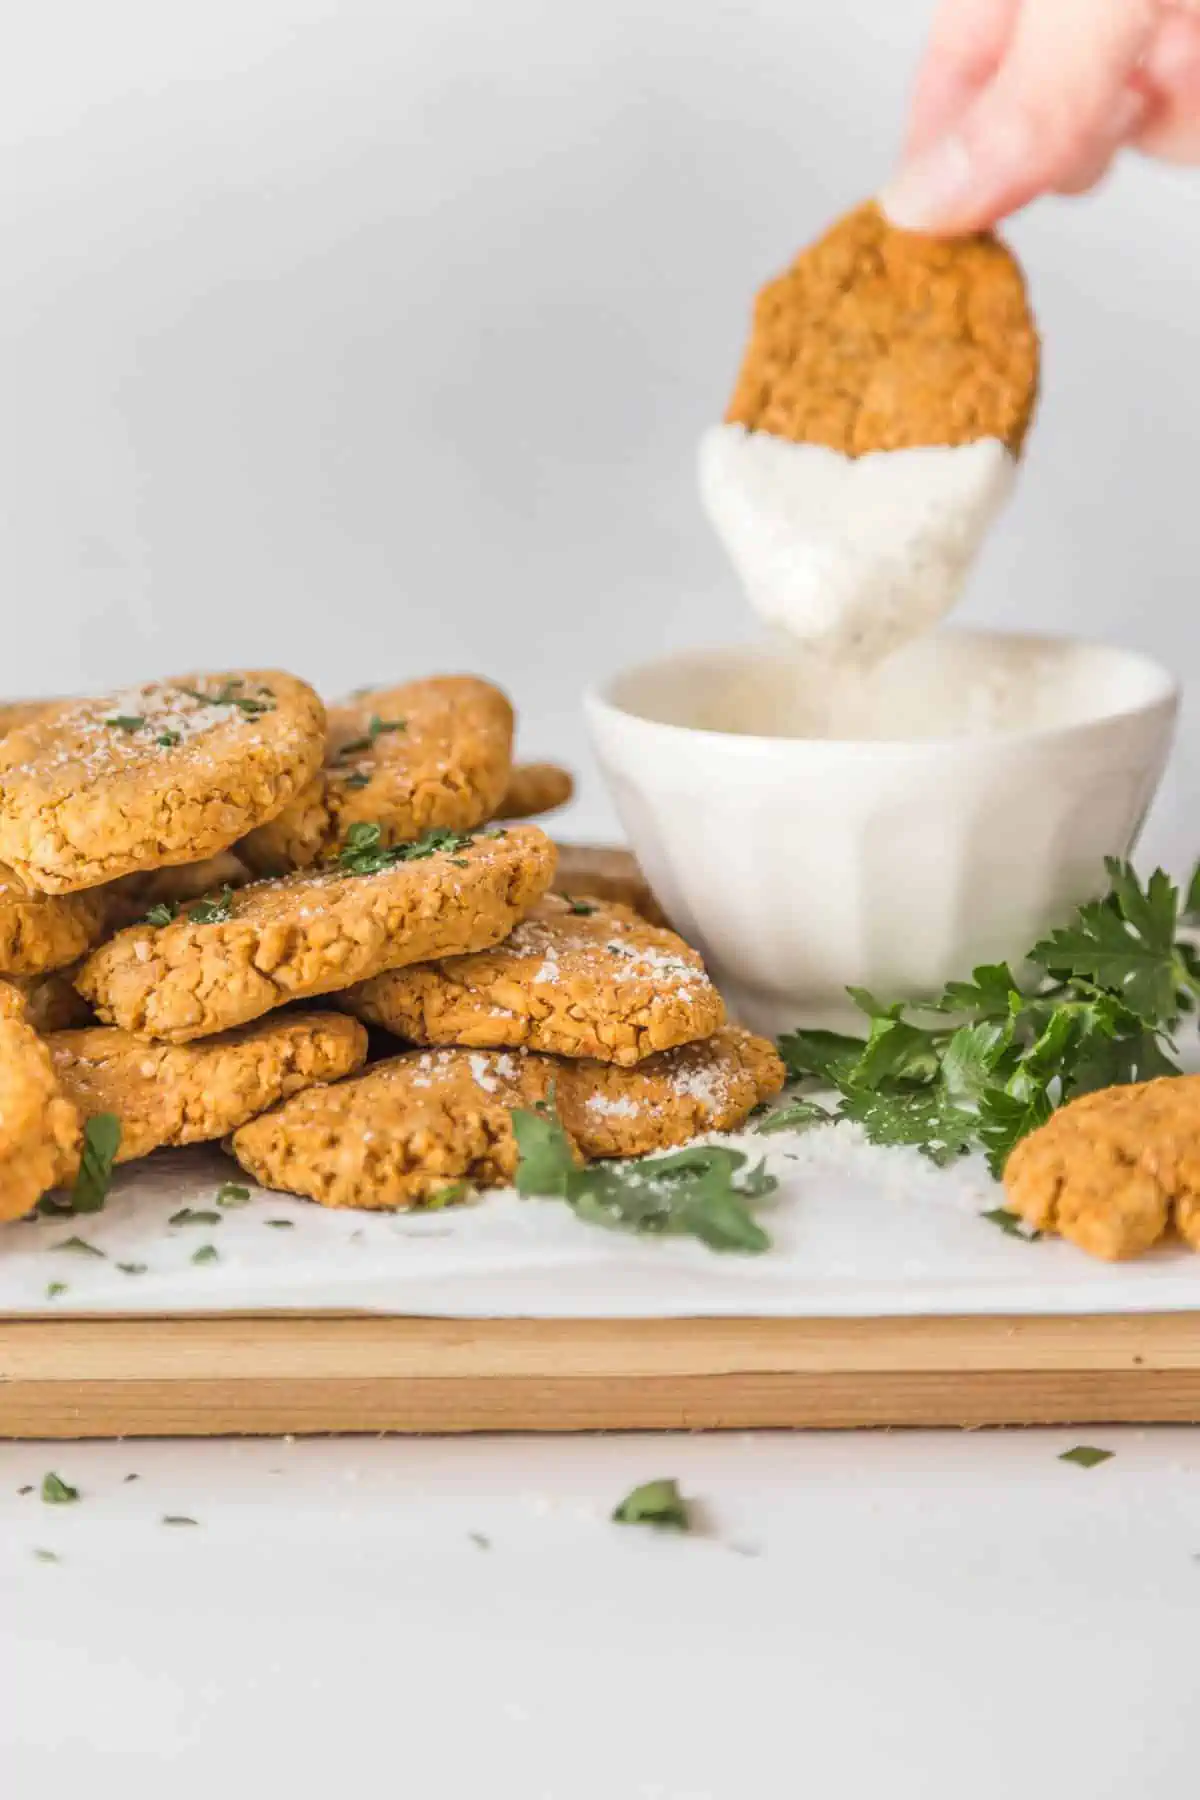 Pile of chickpea nuggets next to a bowl of vegan ranch dip with a dipped nugget hovering over the bowl.